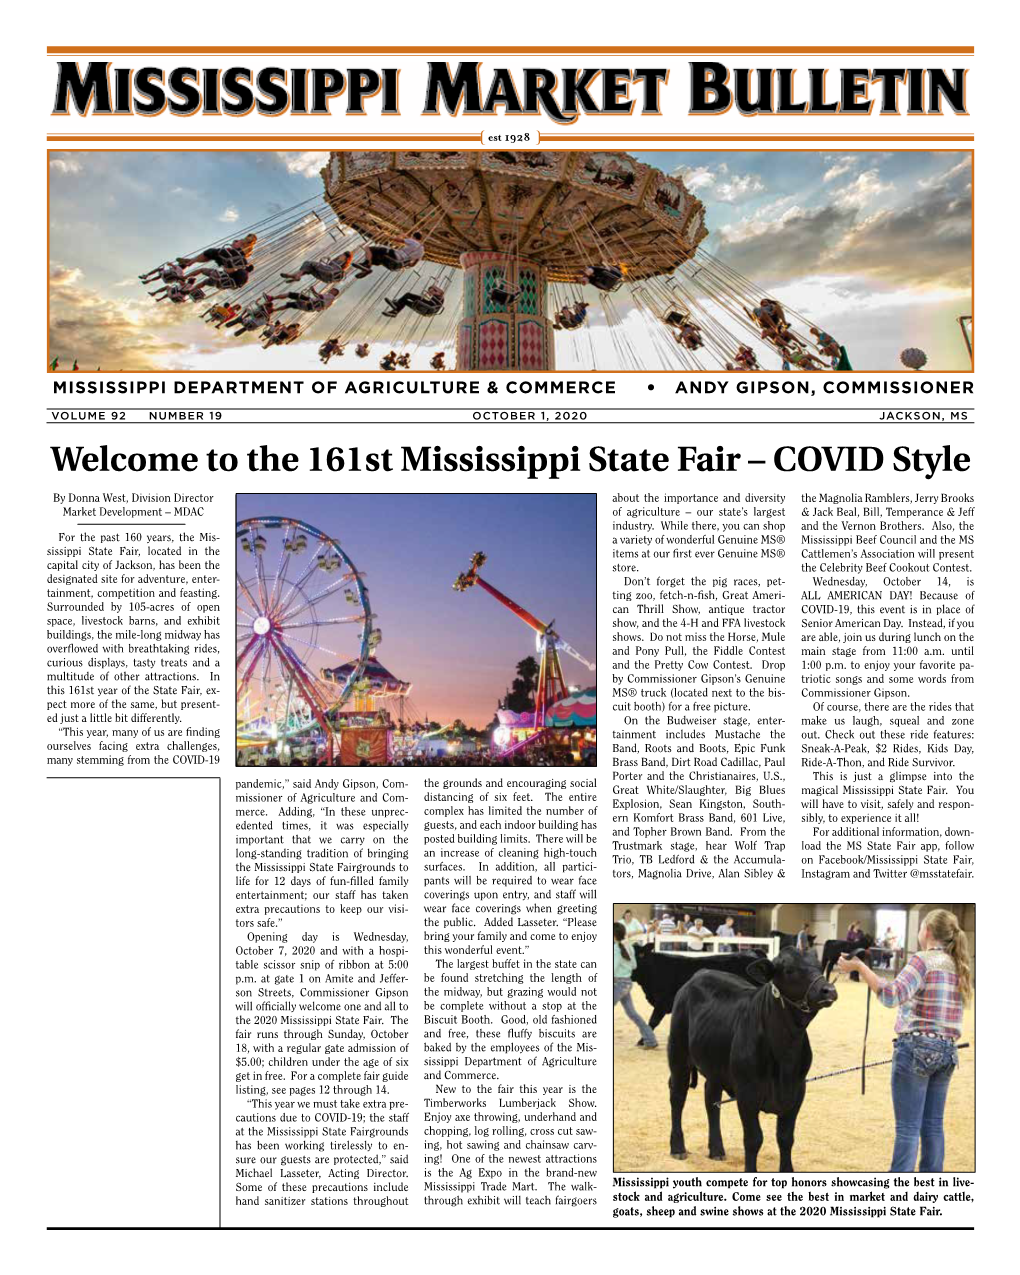 Welcome to the 161St Mississippi State Fair – COVID Style